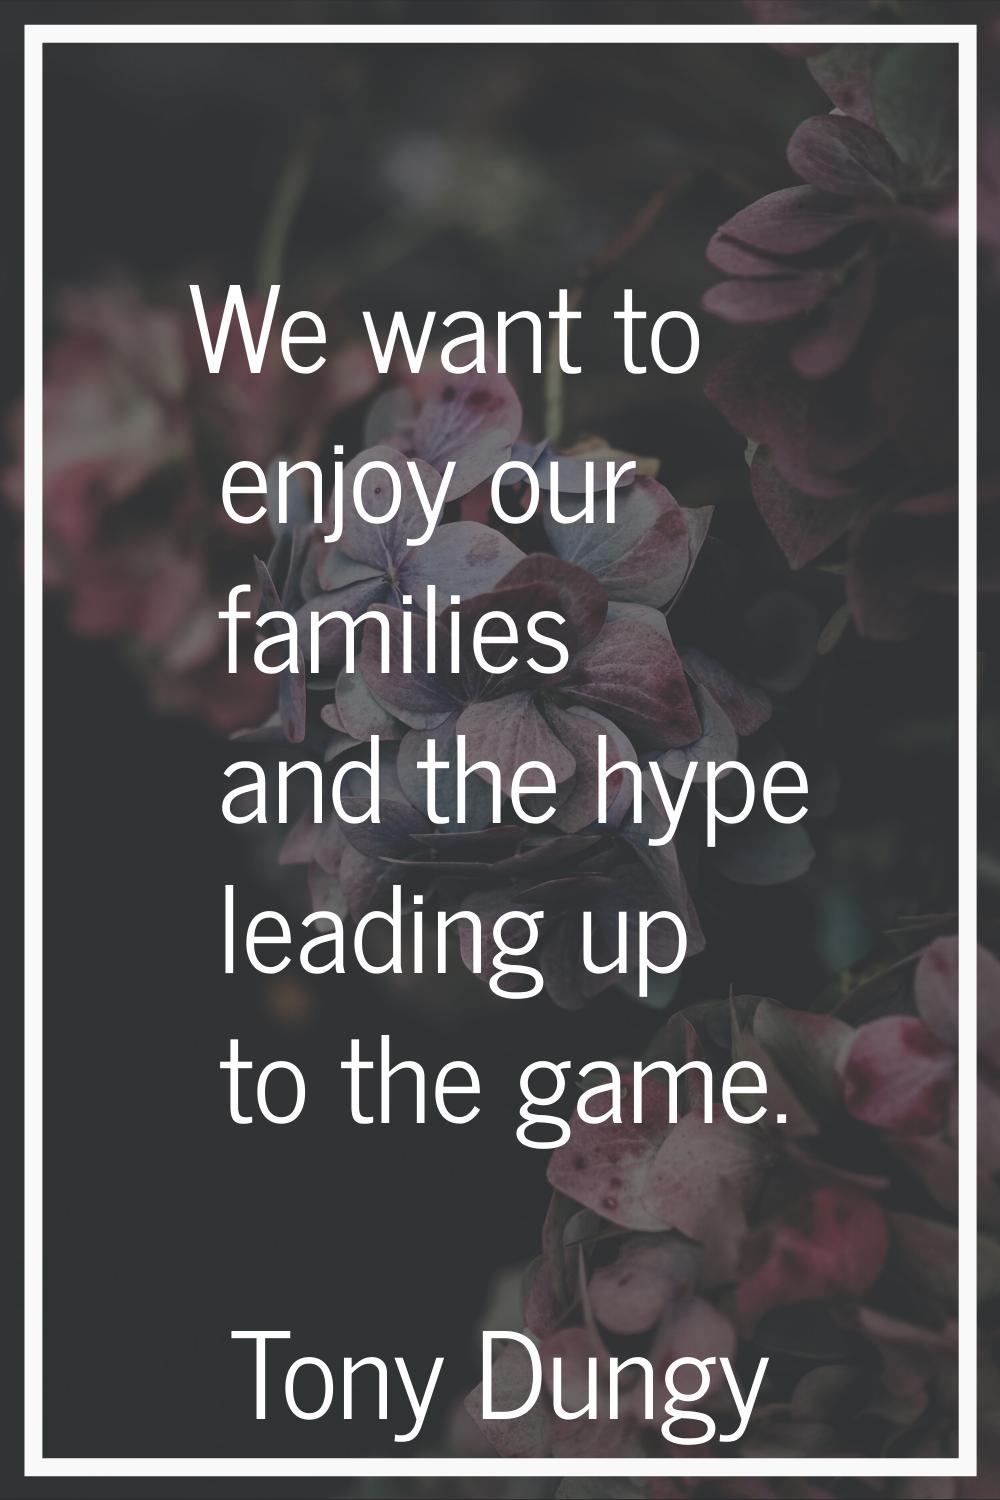 We want to enjoy our families and the hype leading up to the game.